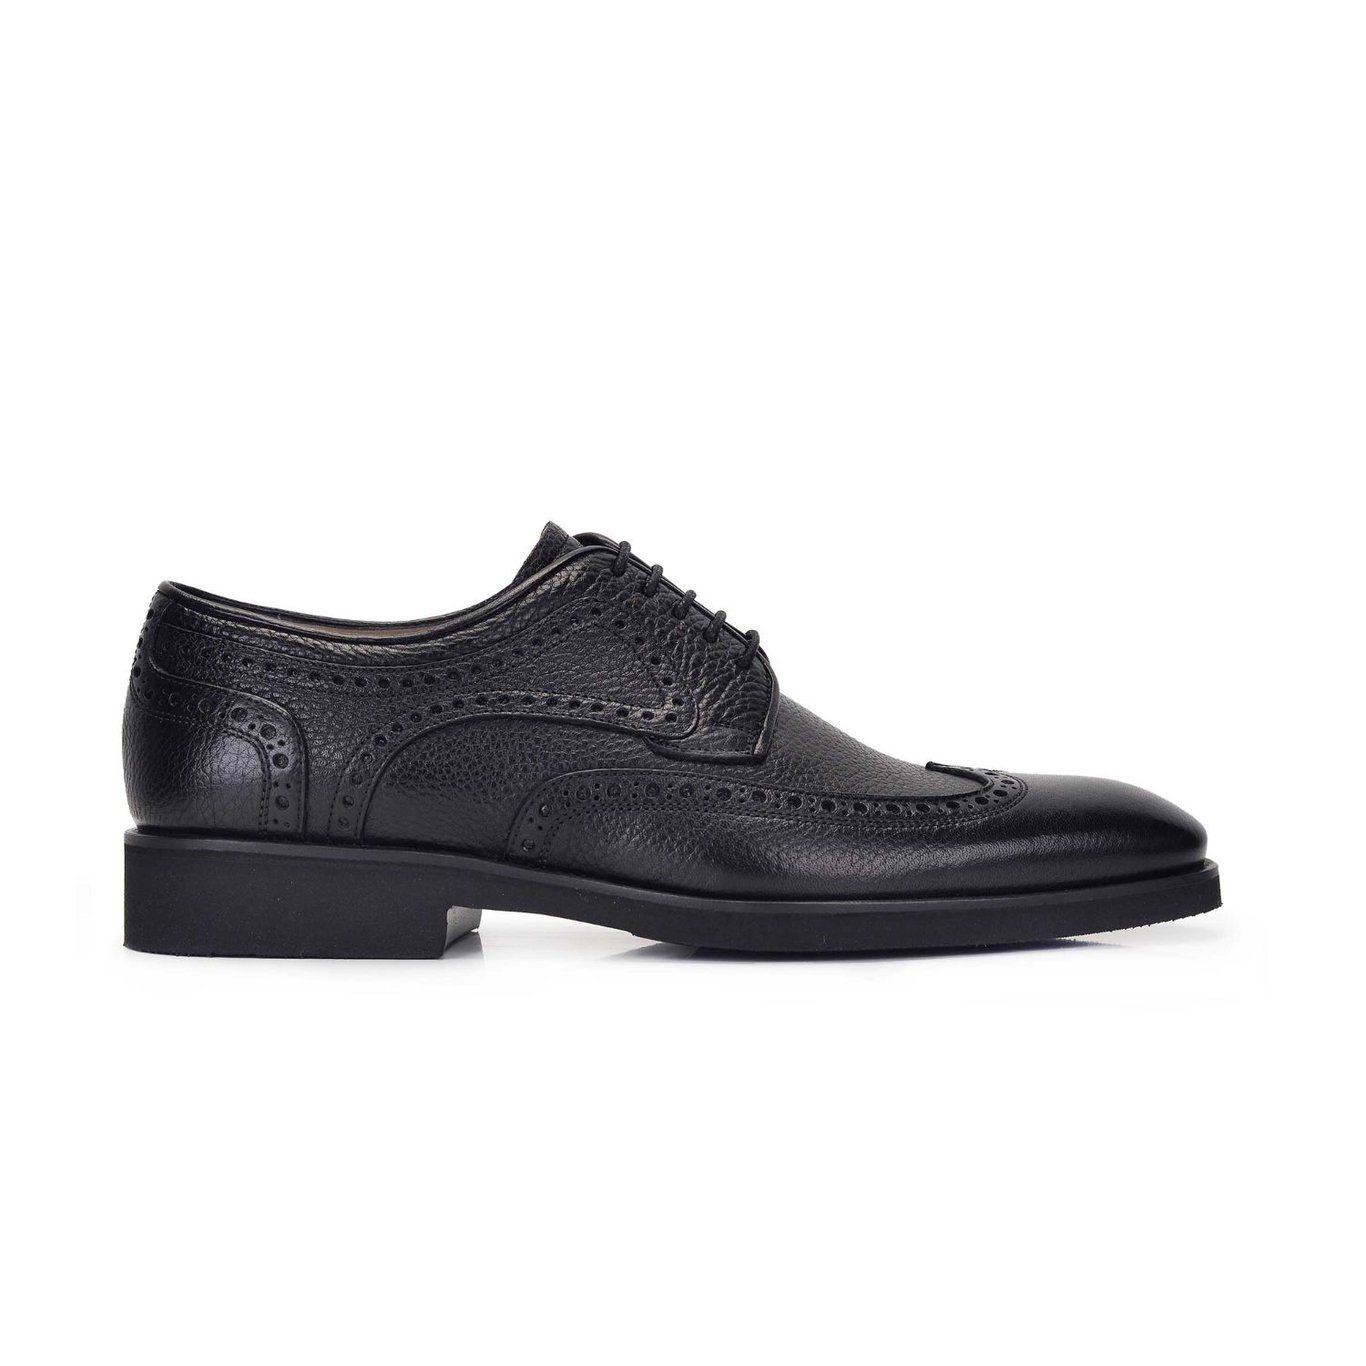 Nevzat Onay Genuine Leather Black Men Classical Shoes -11509-